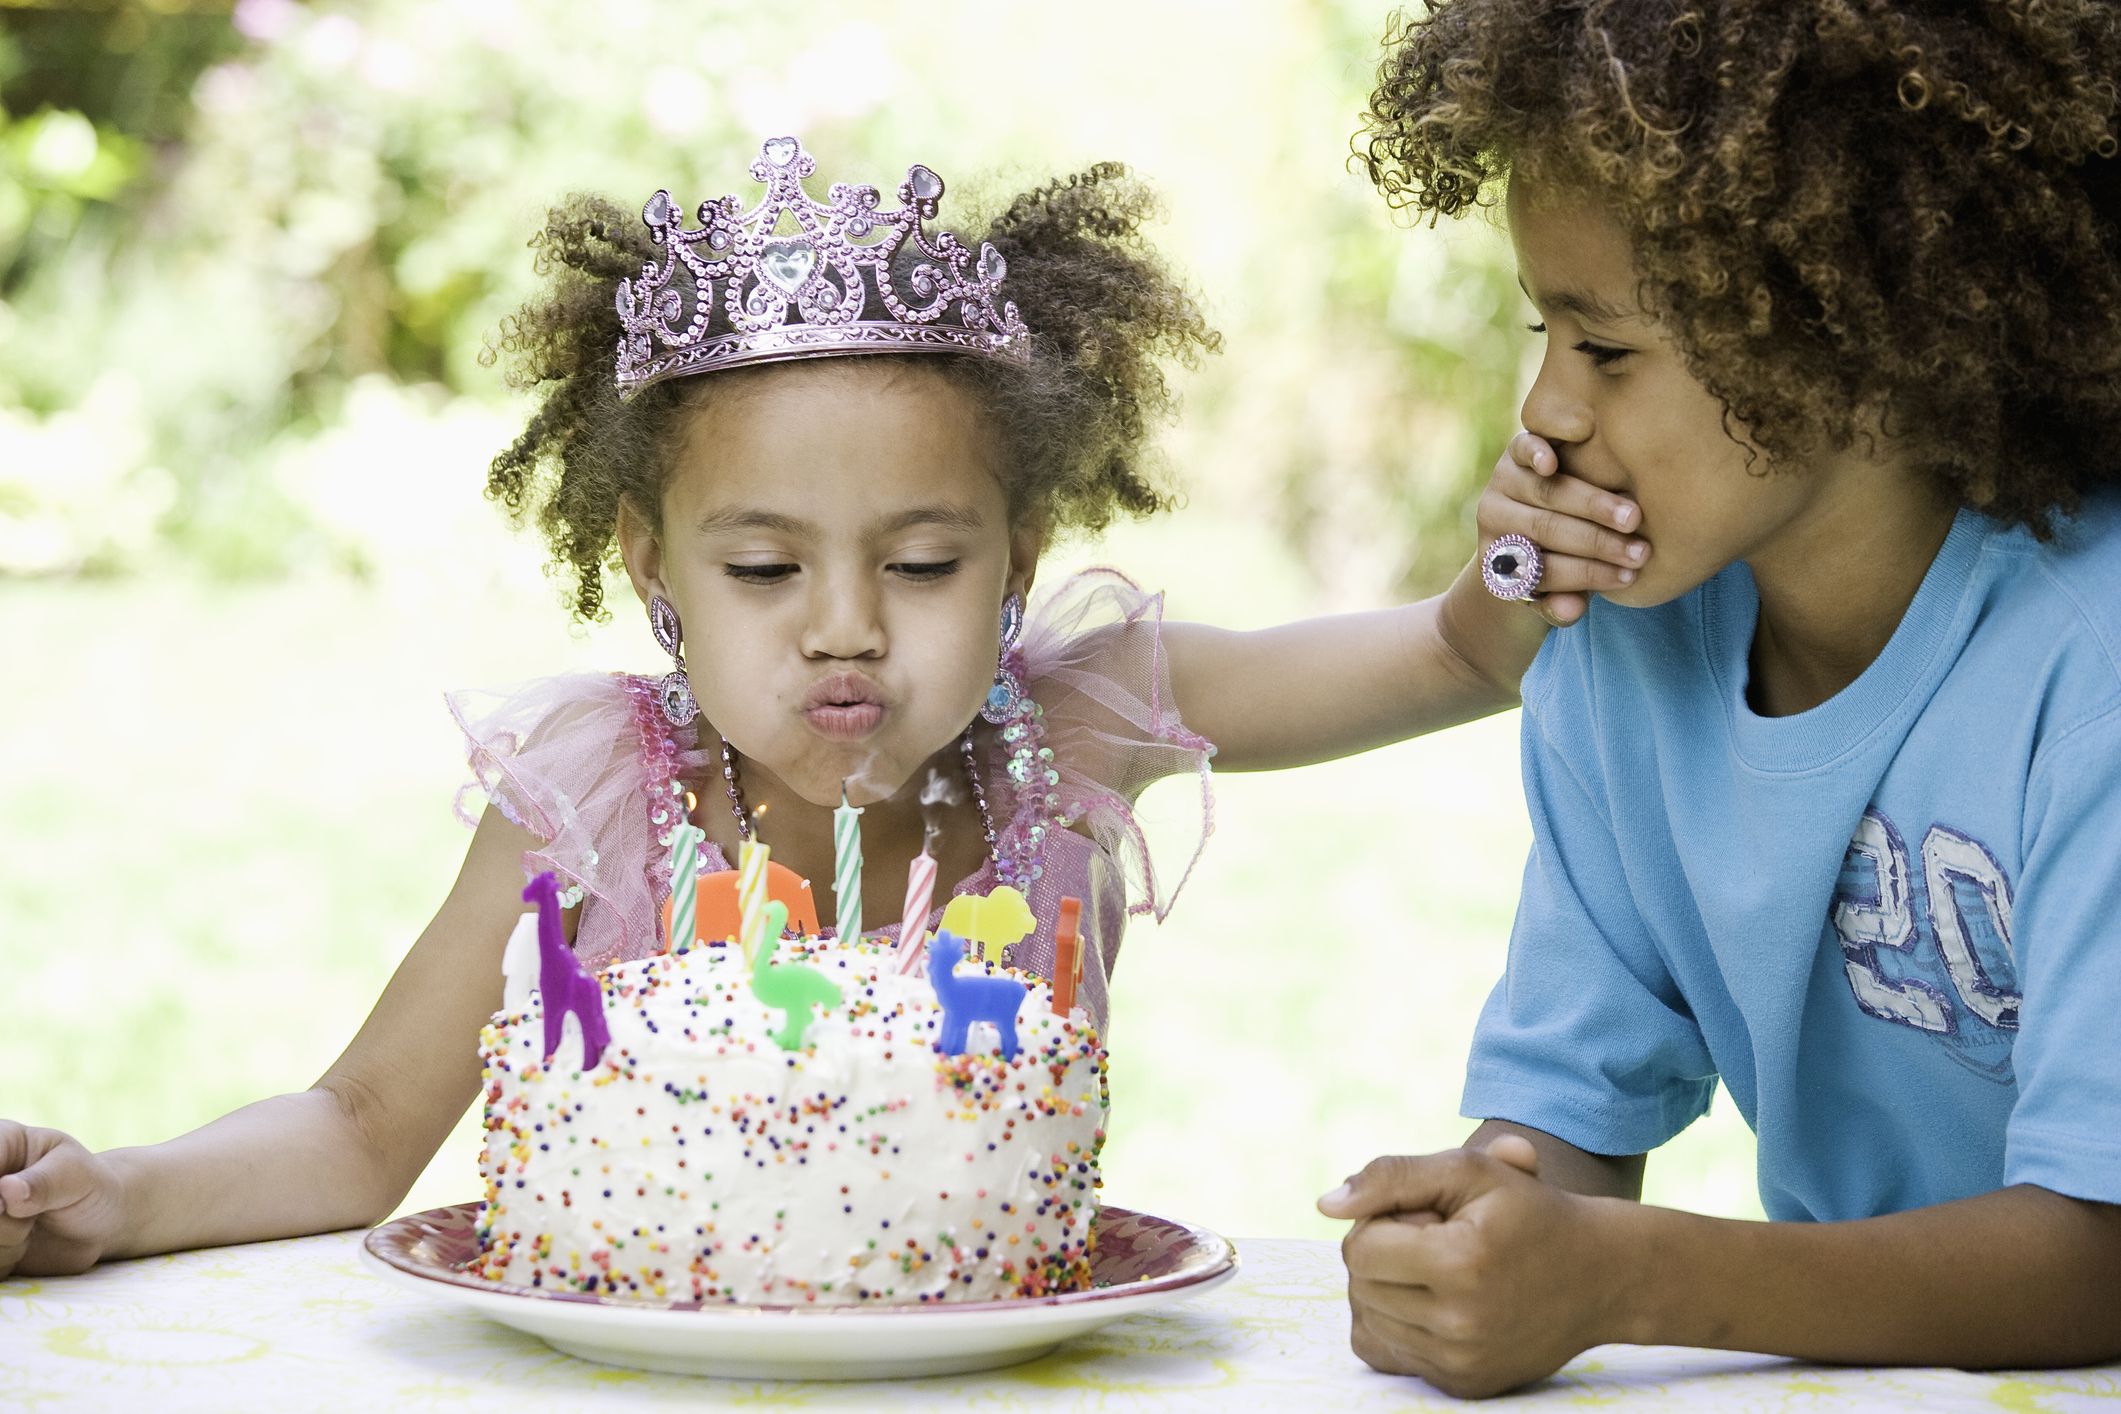 https://hips.hearstapps.com/hmg-prod/images/cute-girl-blowing-out-candles-64f20a5add0dd.jpg